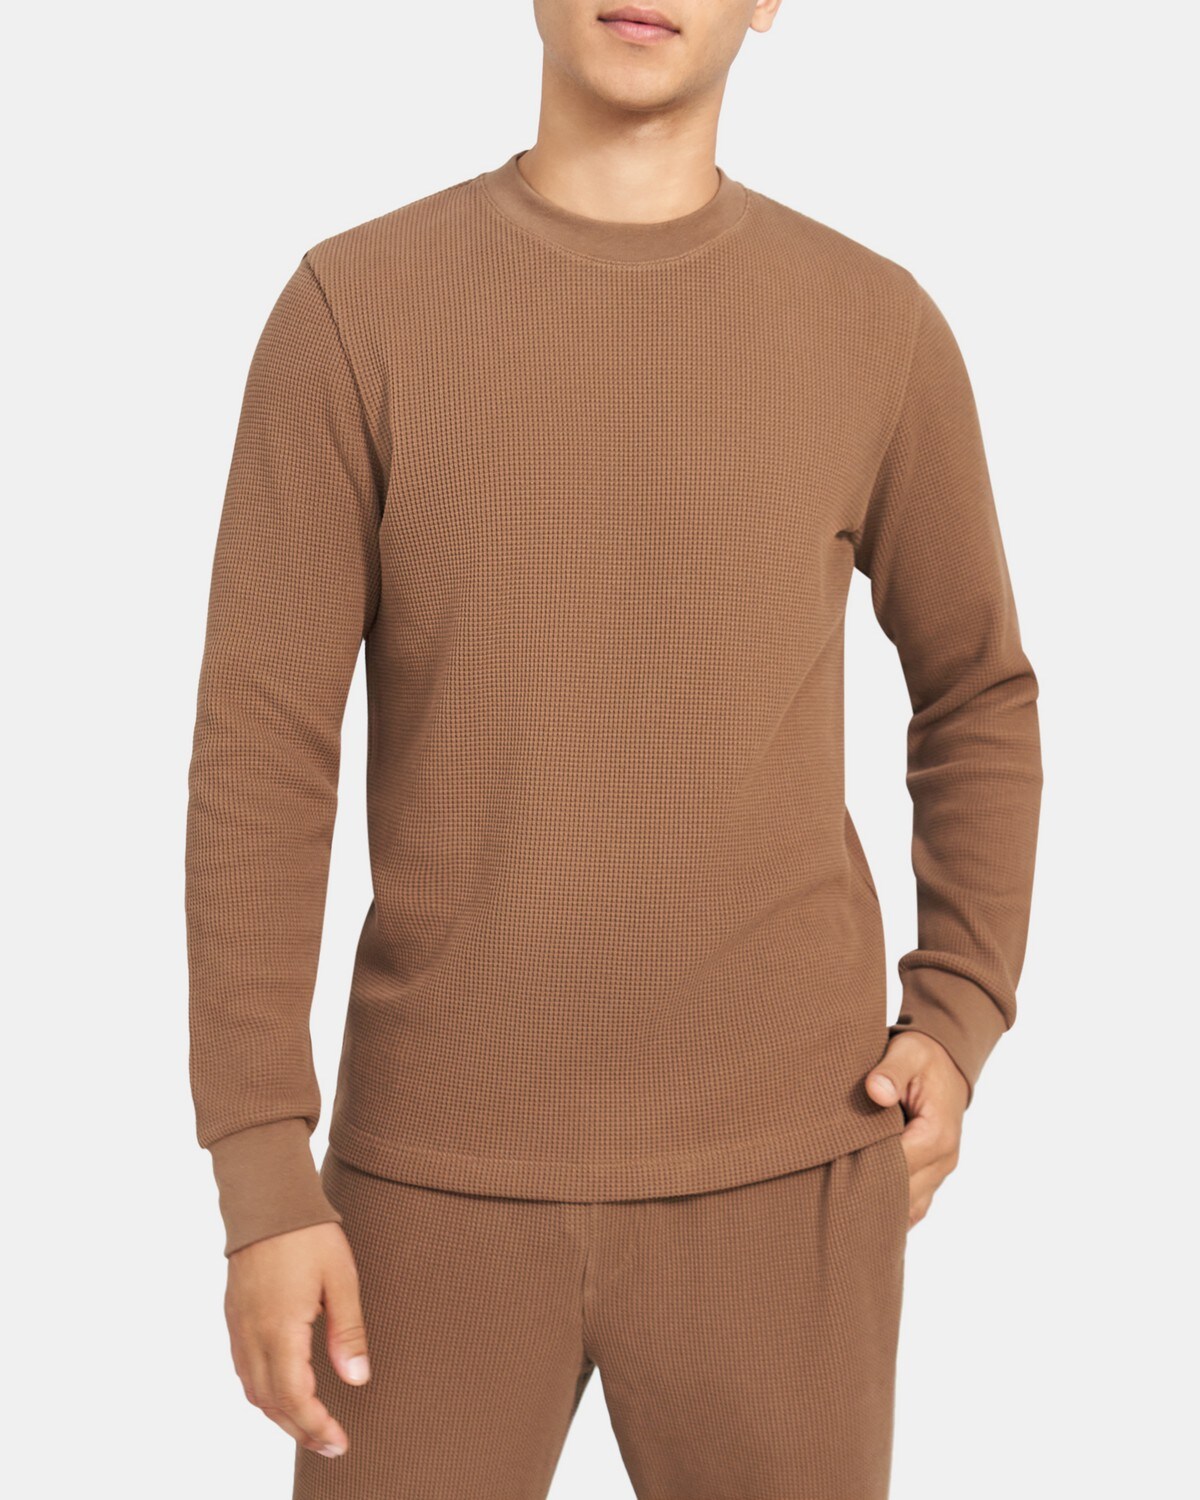 Crewneck Pullover in Waffle Knit Cotton